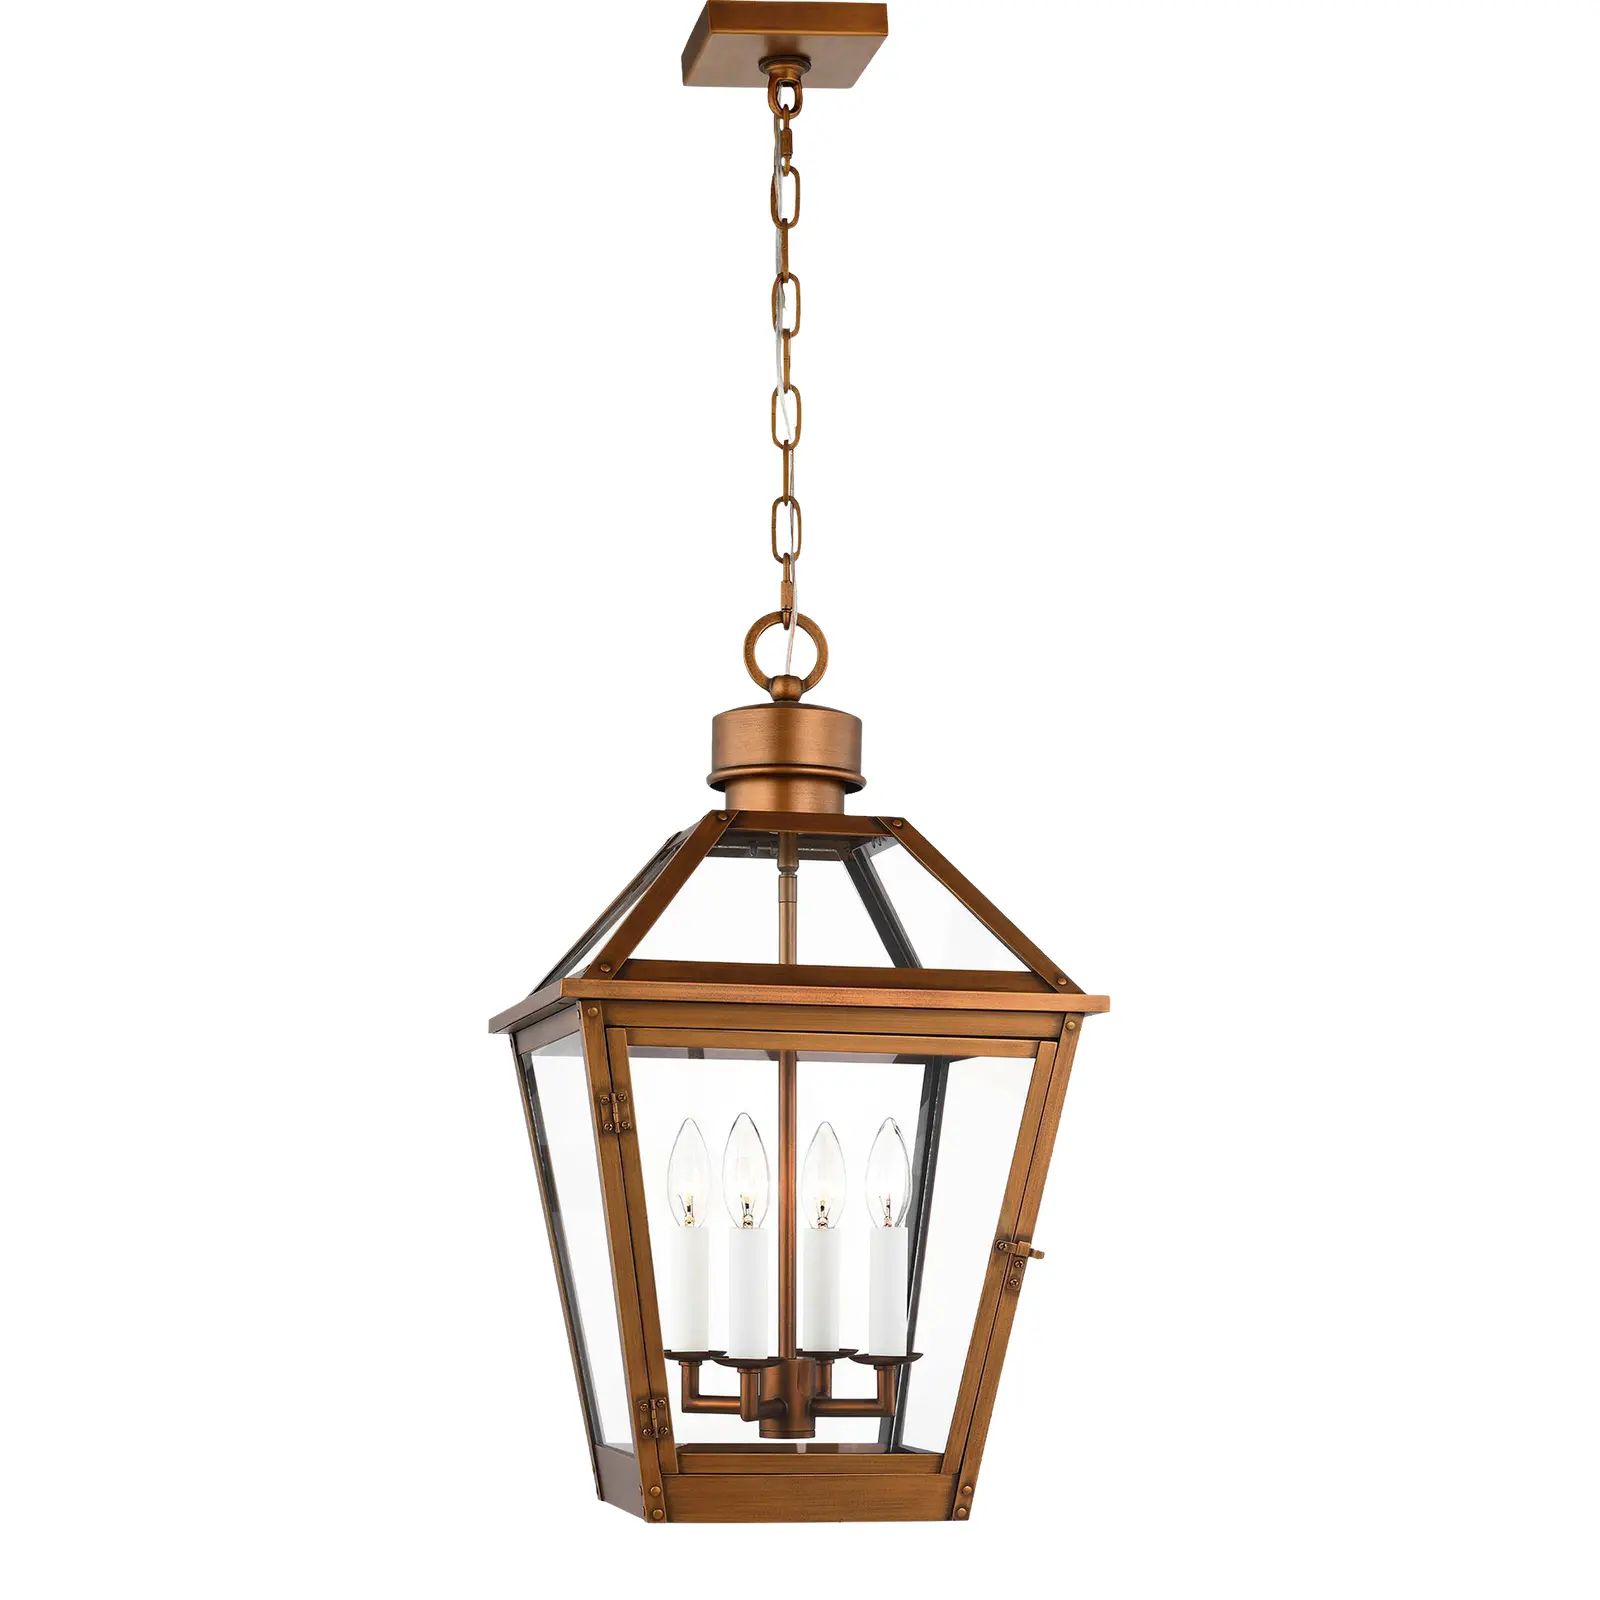 Chapman & Myers by Generation Lighting Hyannis Large Pendant, Natural Copper | Chairish